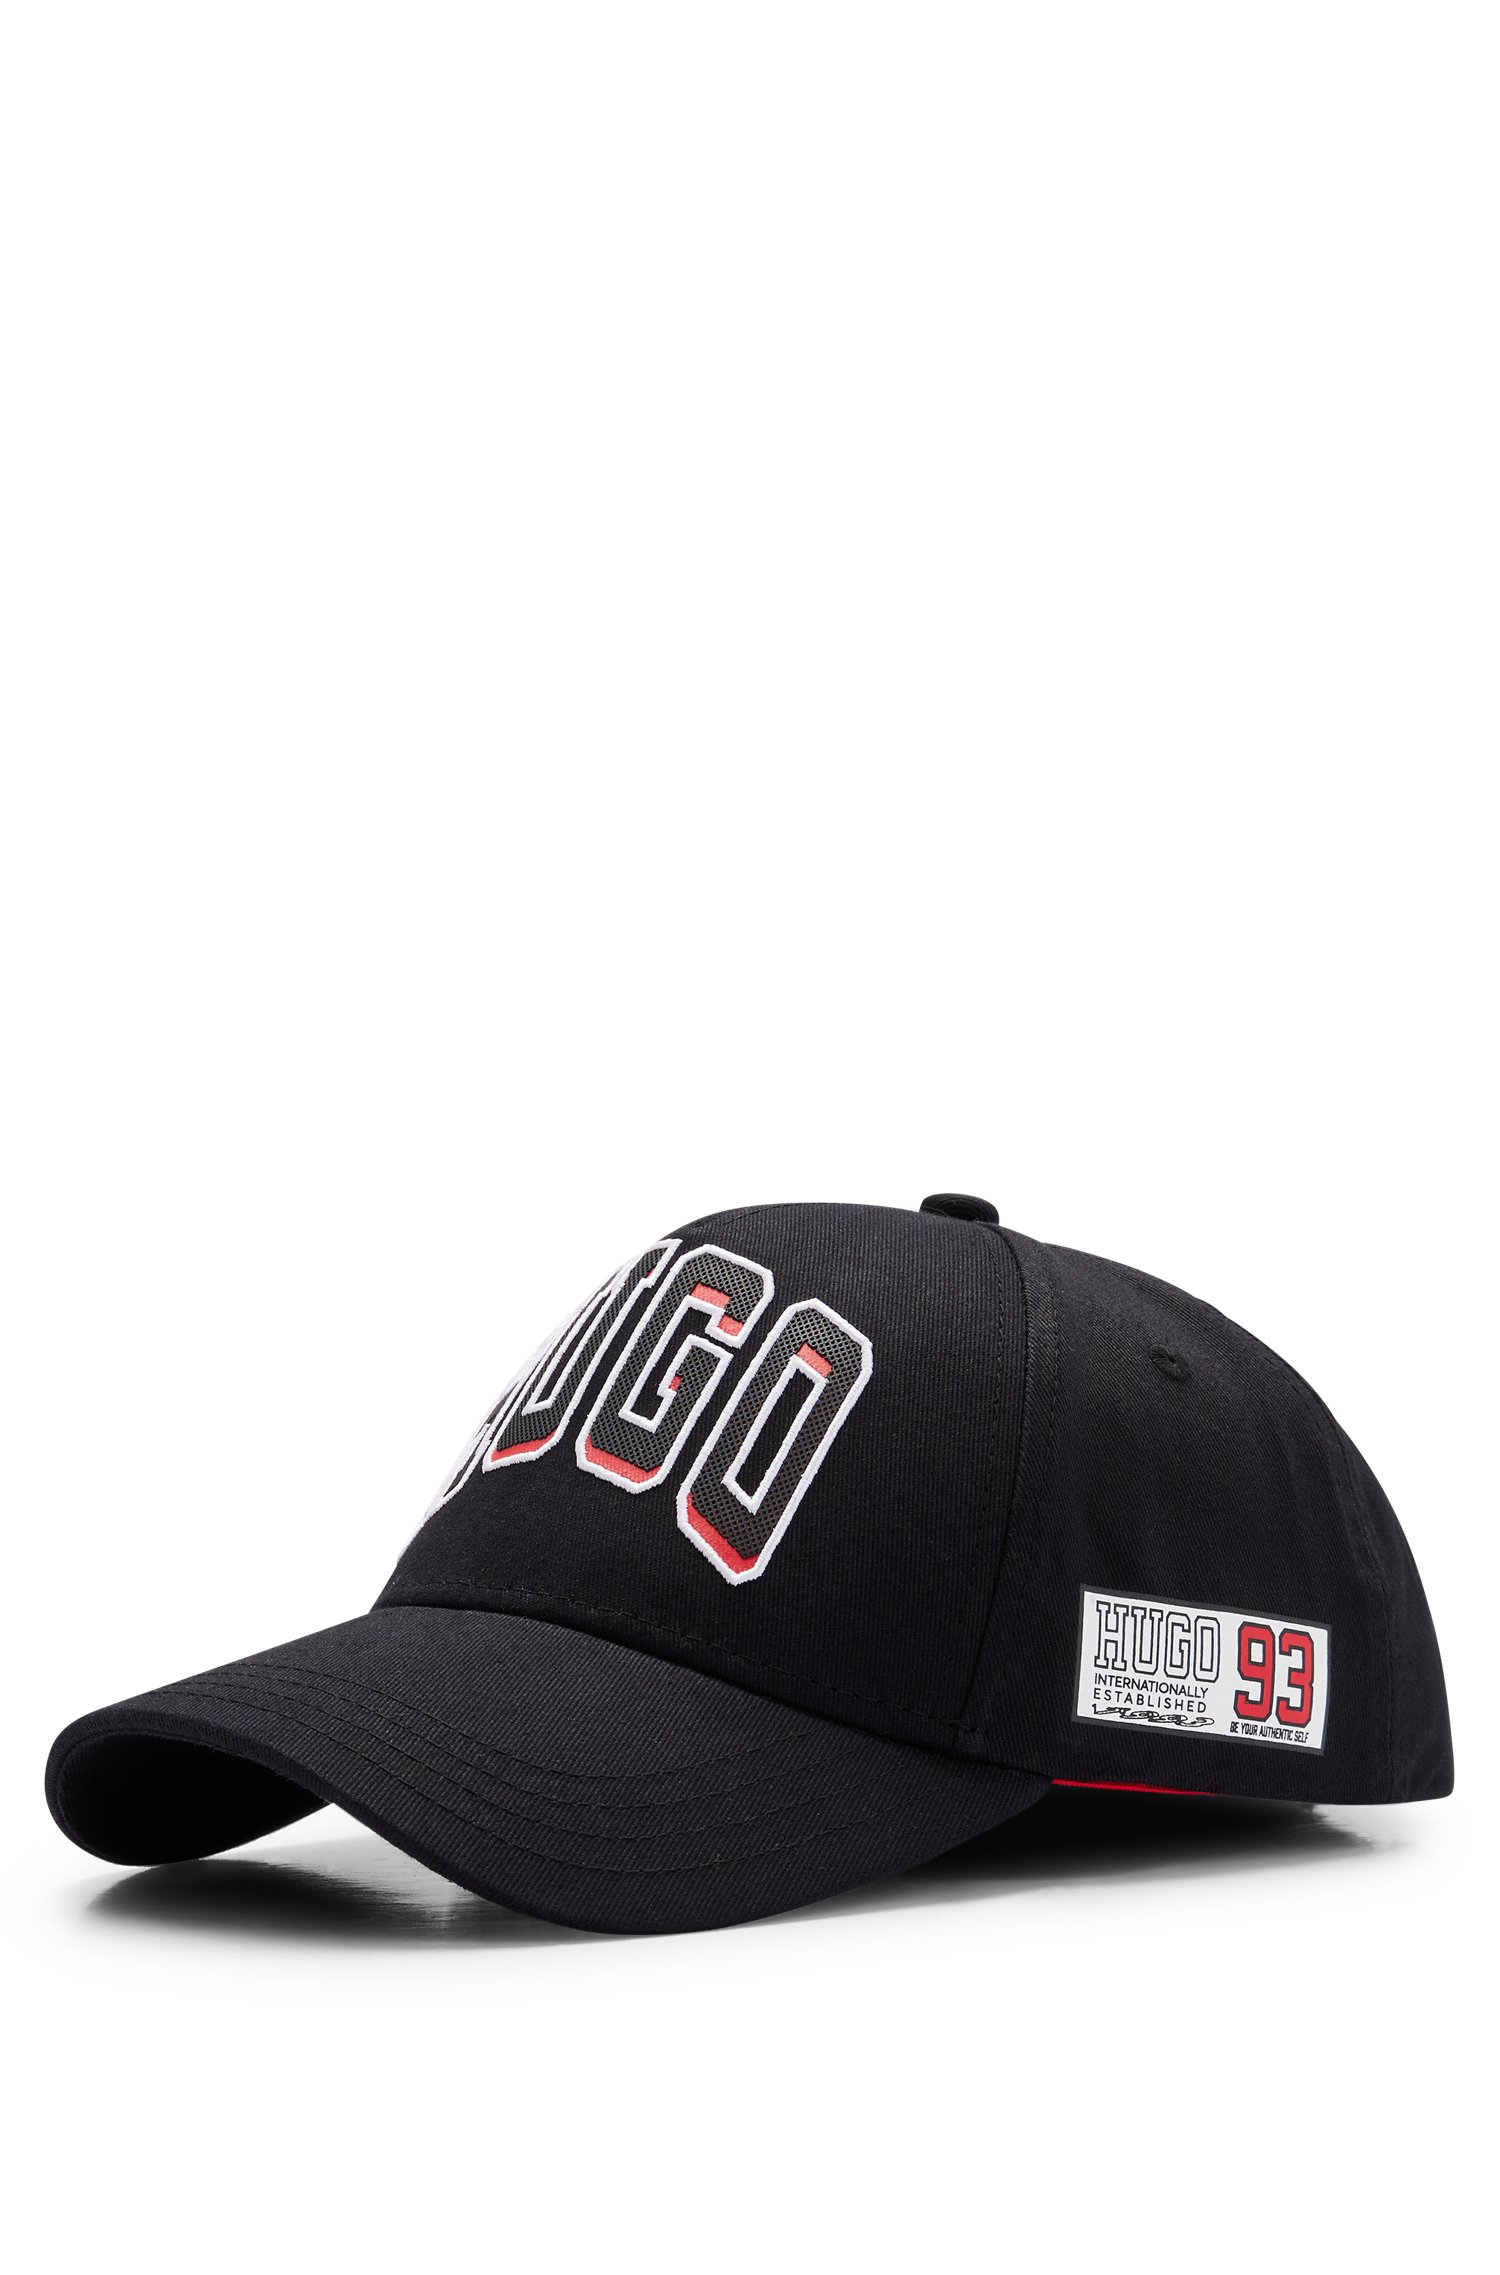 Cotton-twill cap with embroidered logo